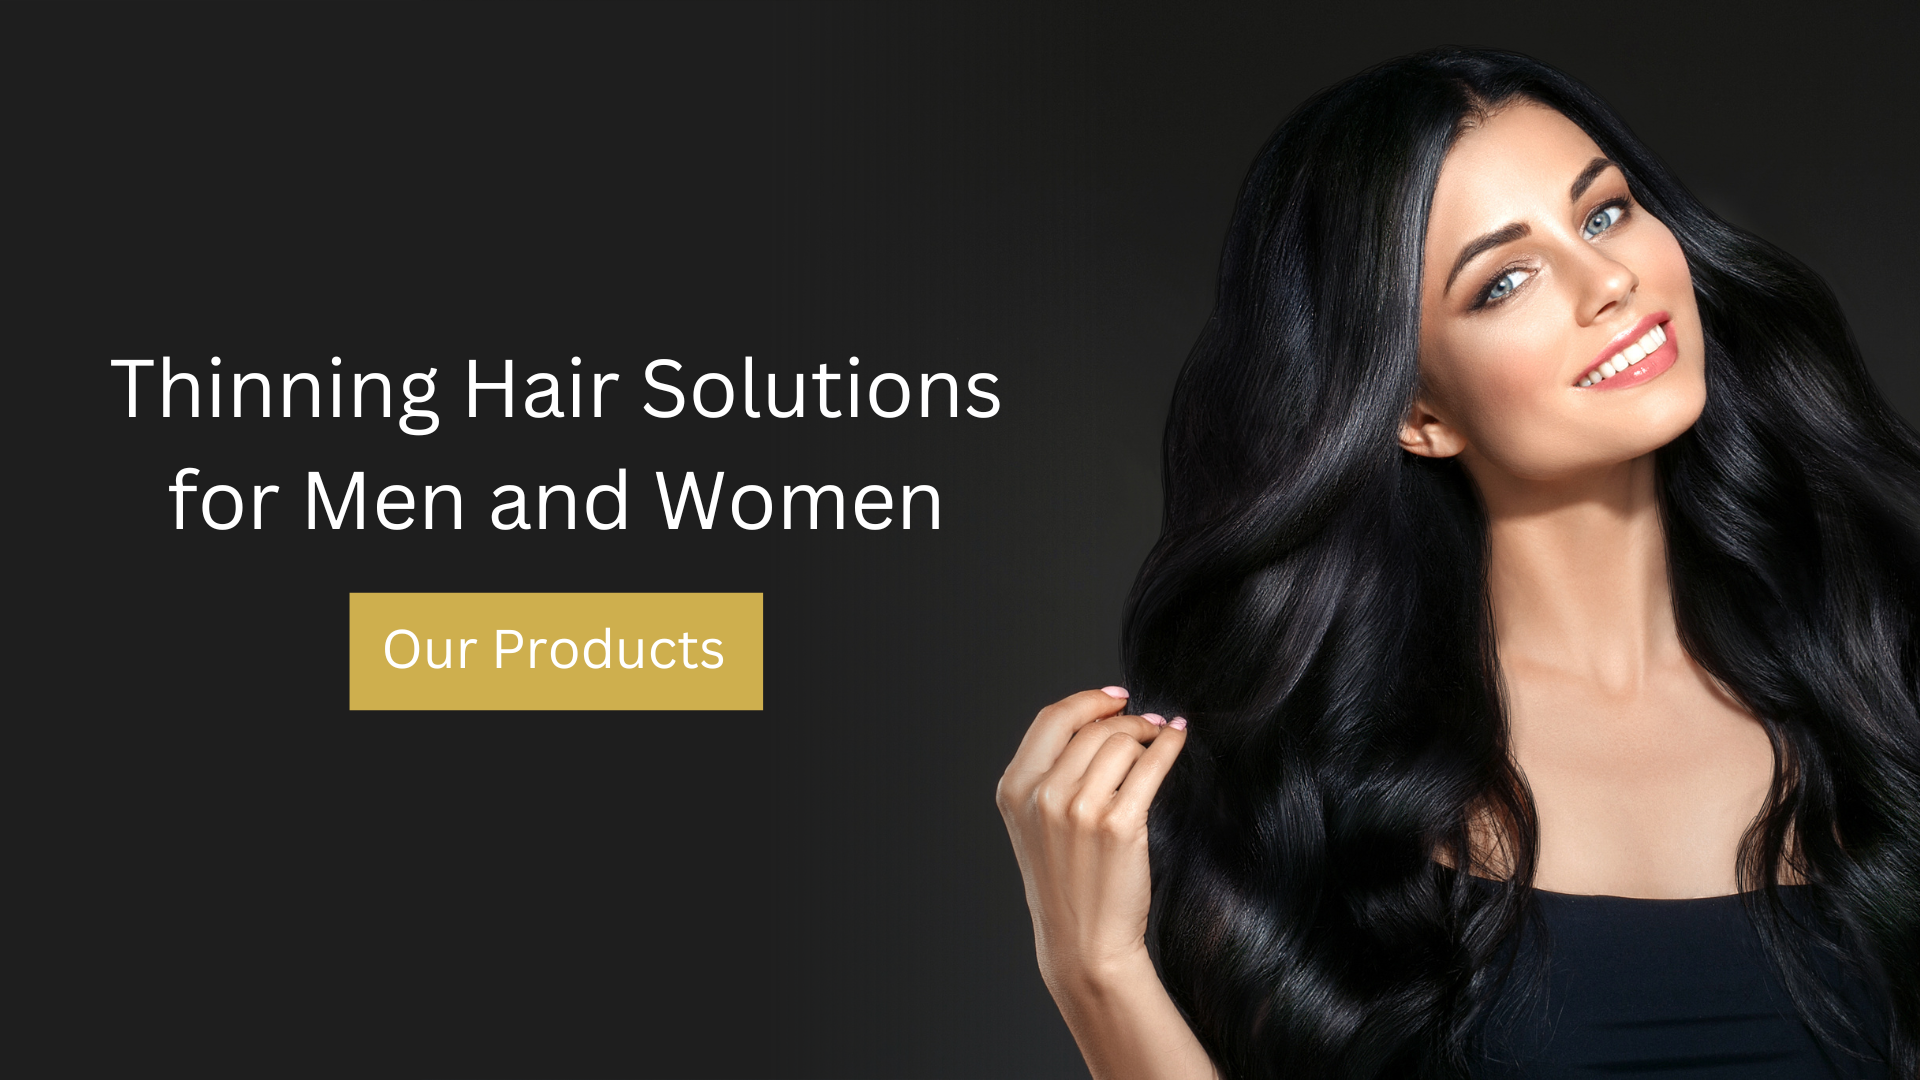 Image banner - Thinning hair solutions for men and women